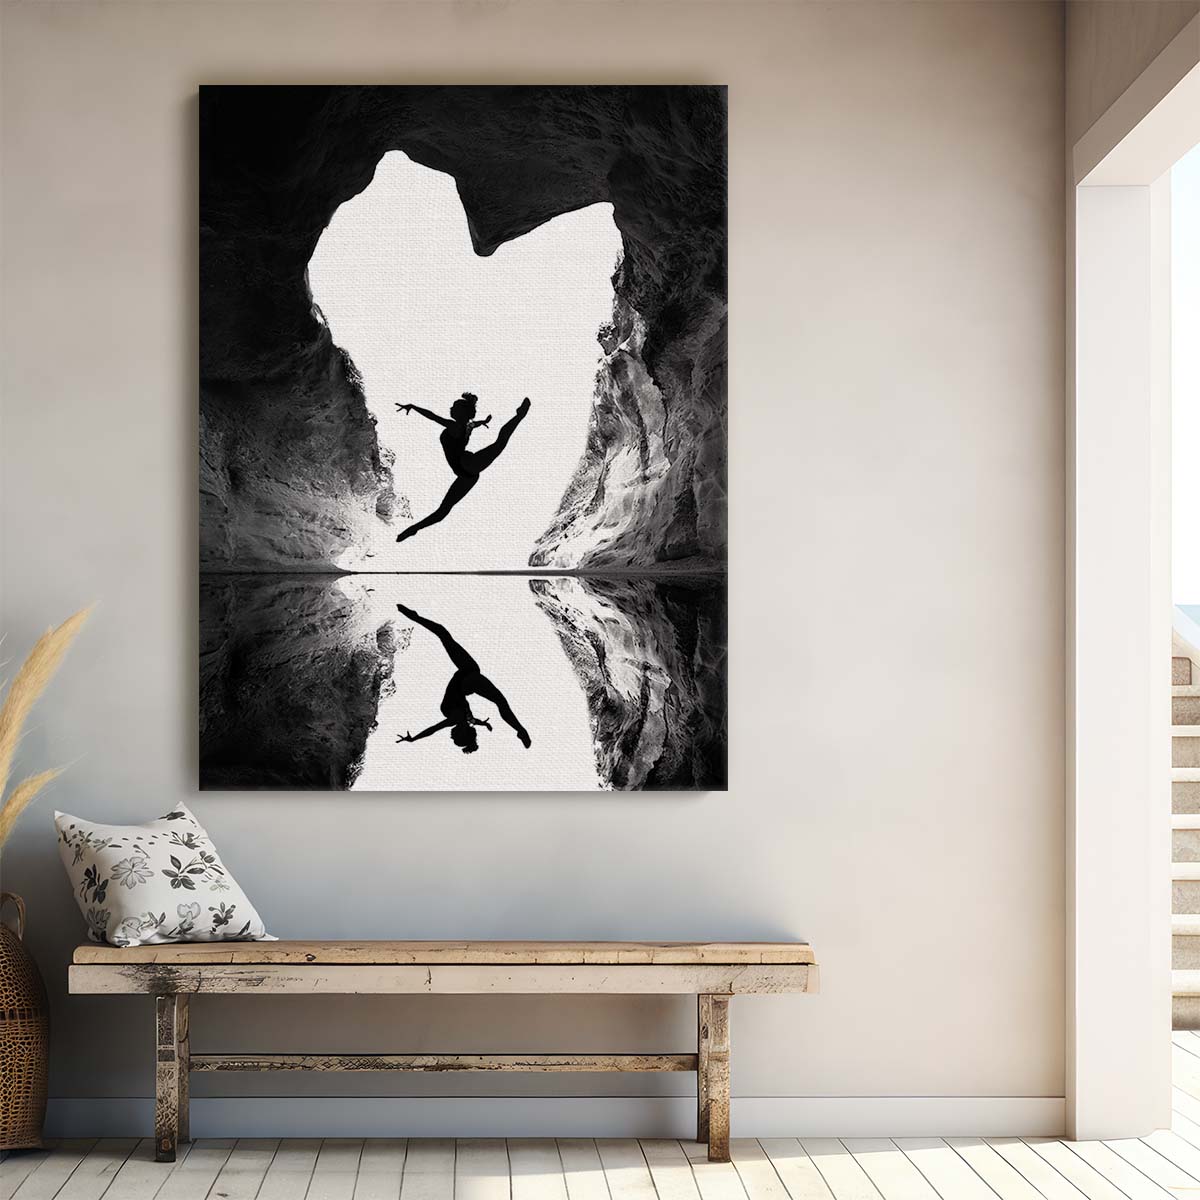 Graceful Ballerina Mid-Leap BW Silhouette Art Photography by Luxuriance Designs, made in USA